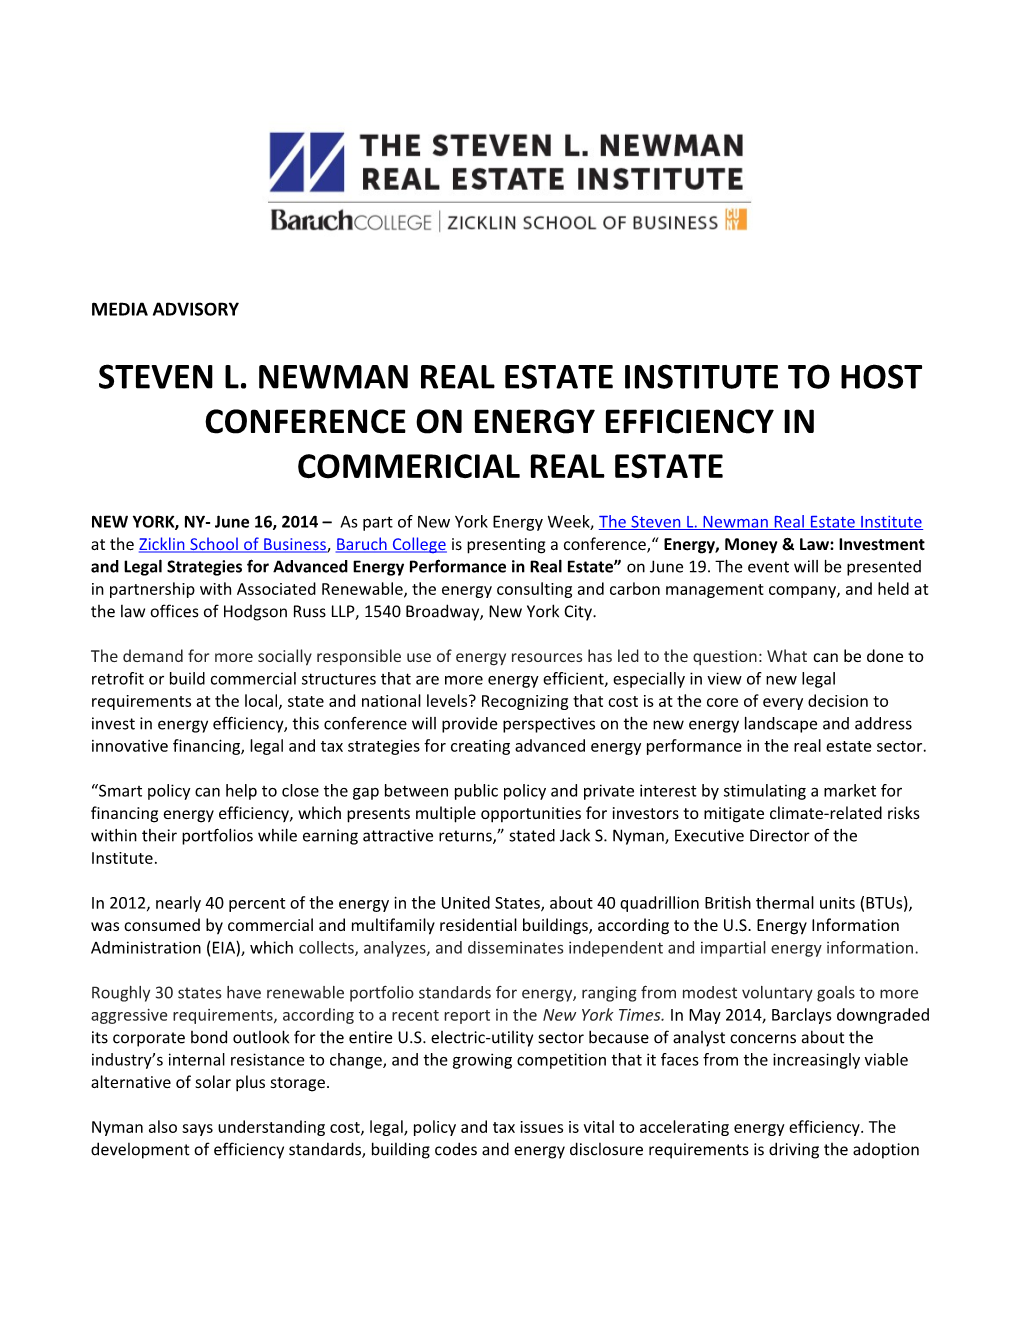 Steven L. Newman Real Estate Institute to Host Conference on Energy Efficiency in Commericial